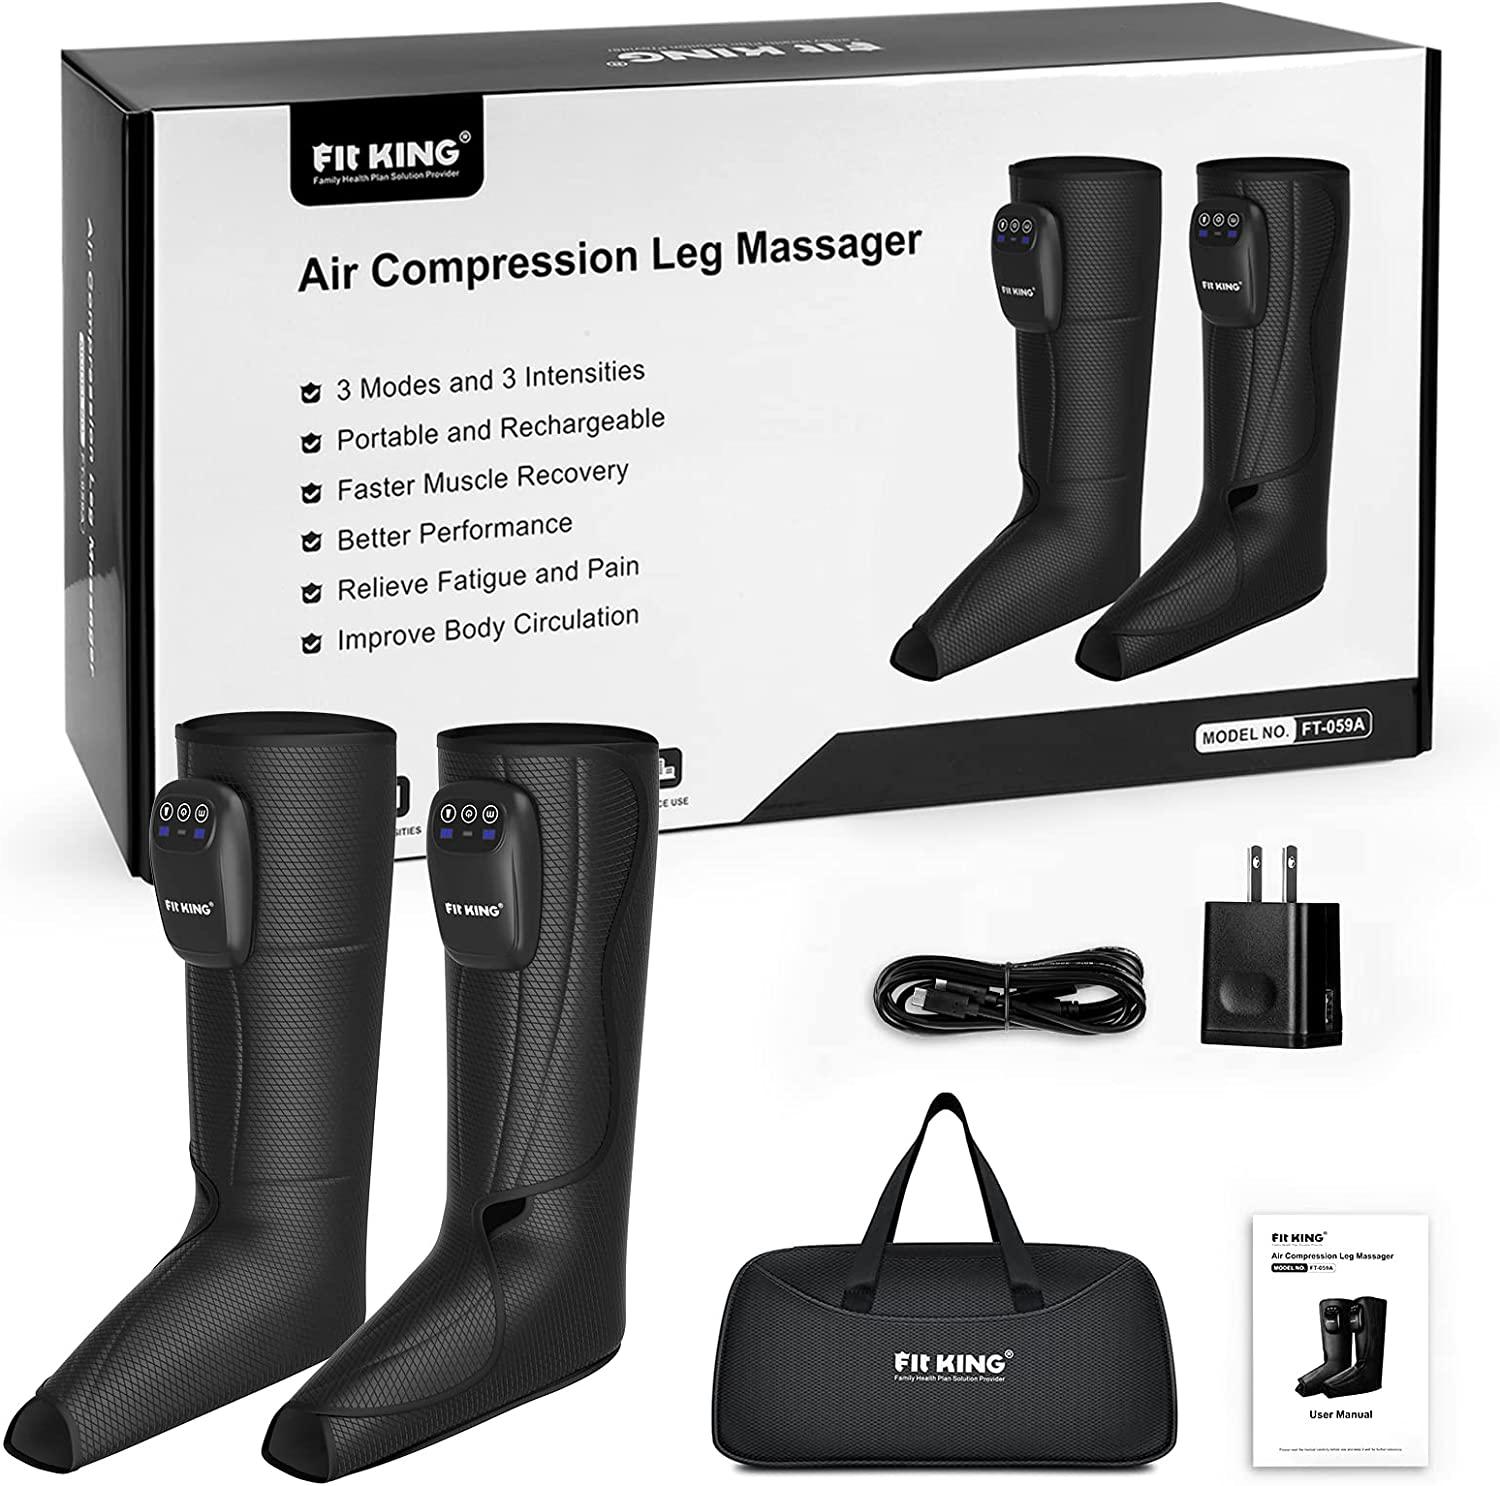 Buy FT-059A Cordless & Rechargeable Foot & Leg Massager